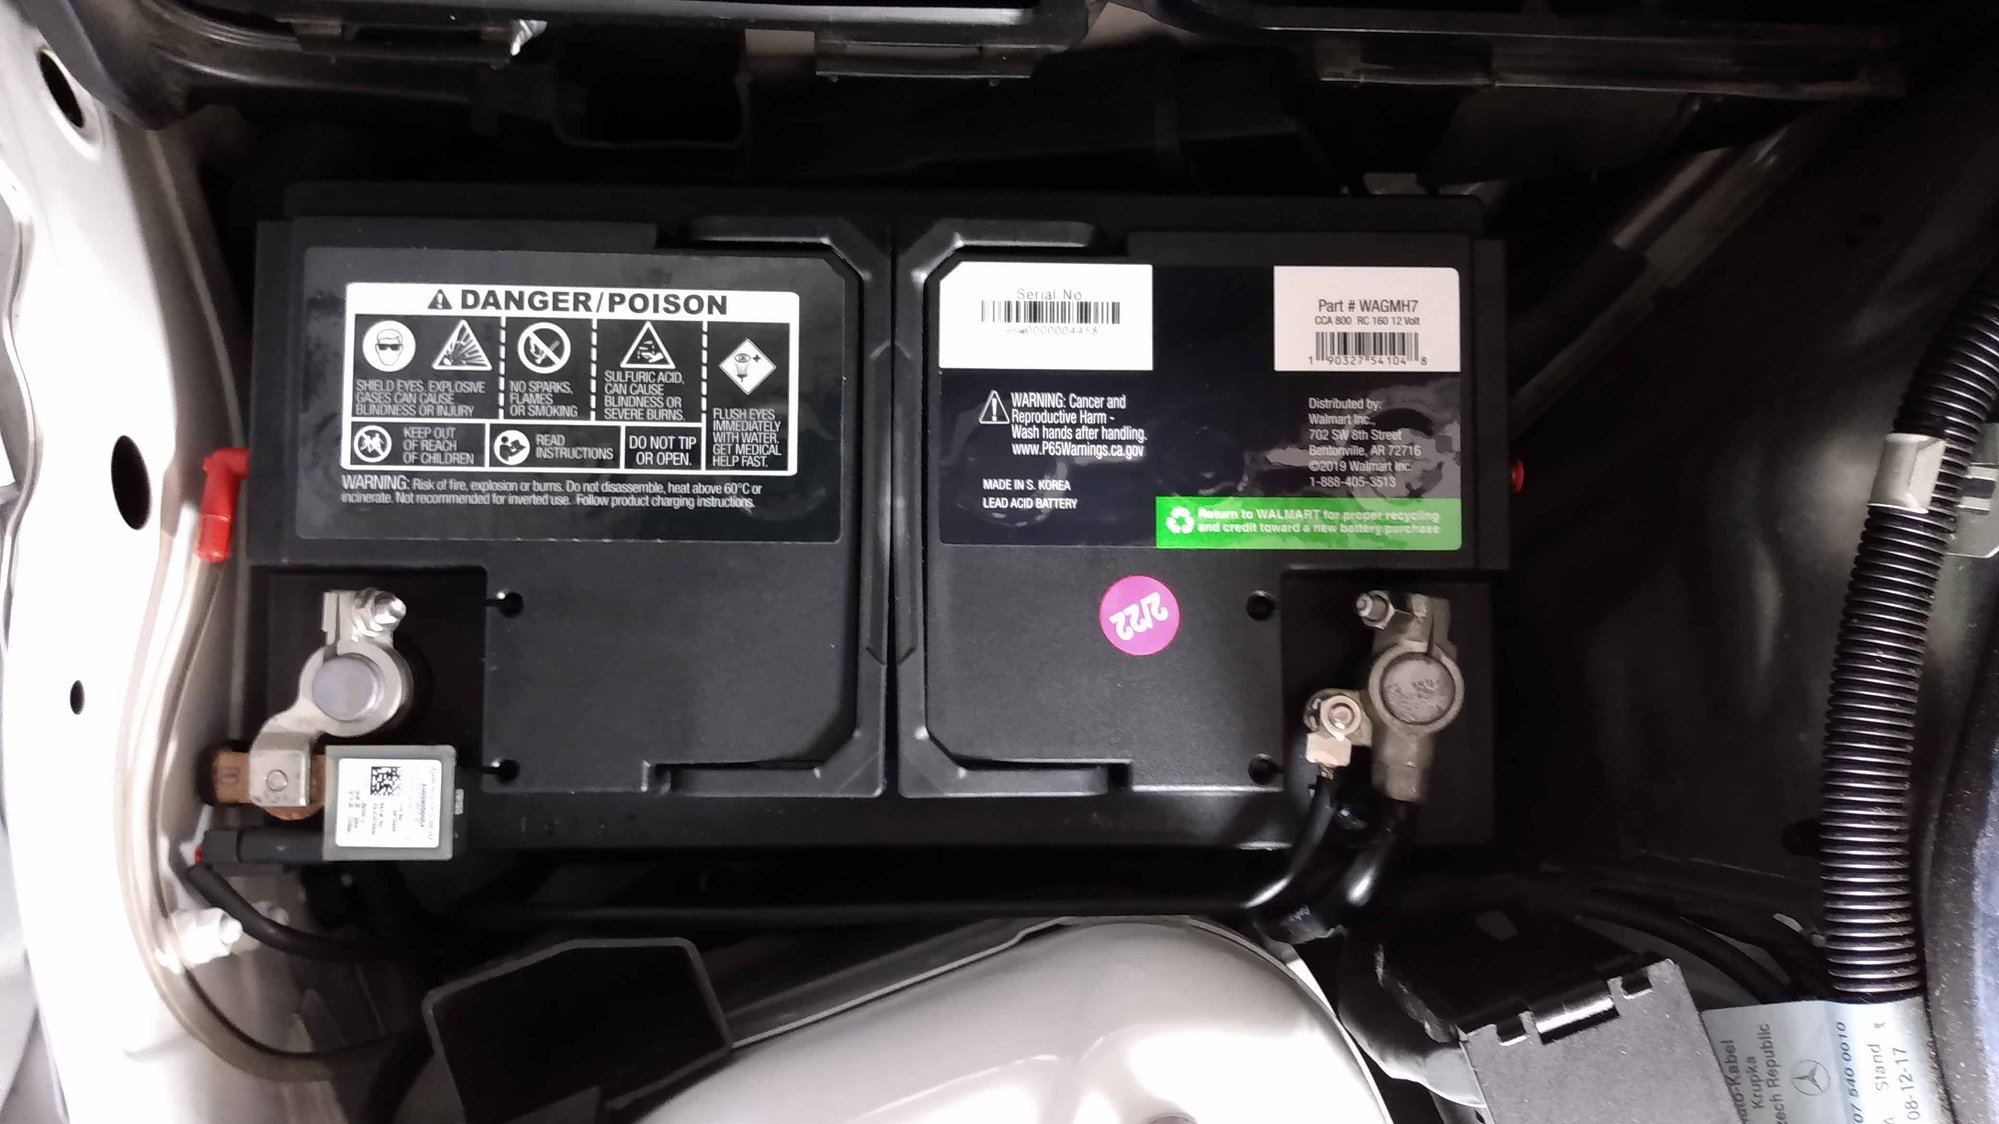 New replacement part# for battery A 000 982 21 08? -  Forums